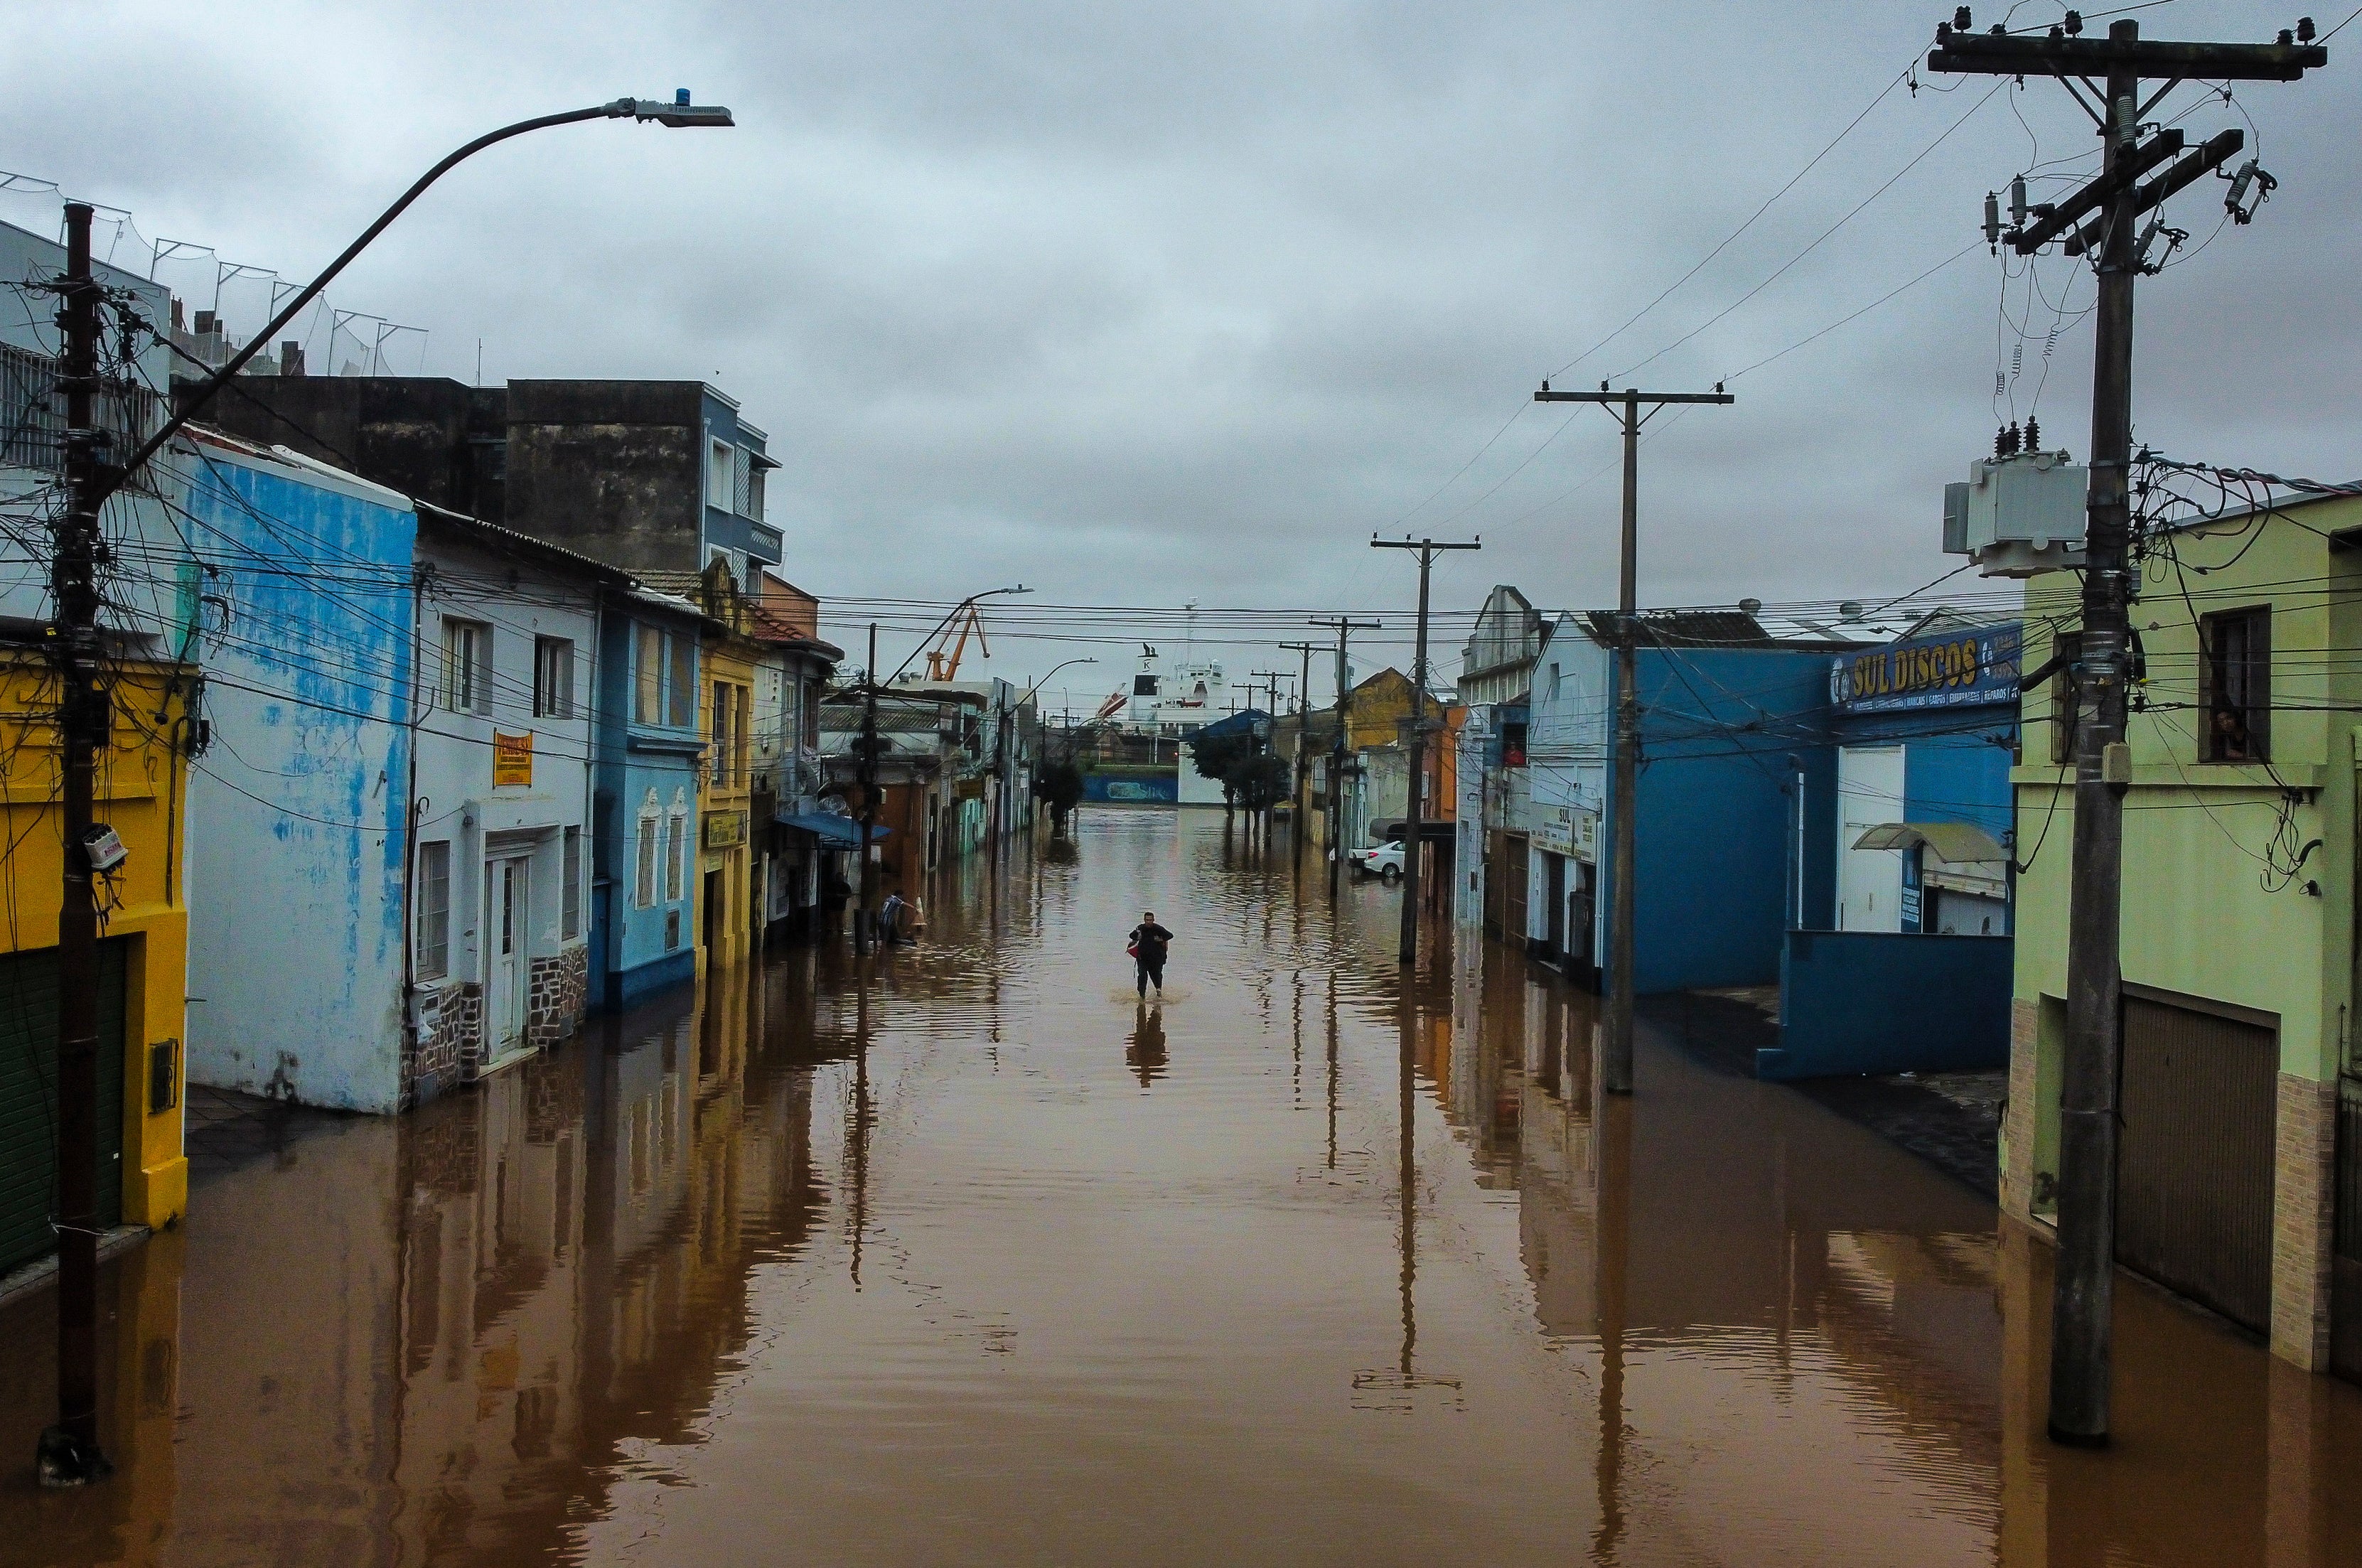 amazon, floods in brazil kill 39 with dozens more still missing and thousands displaced